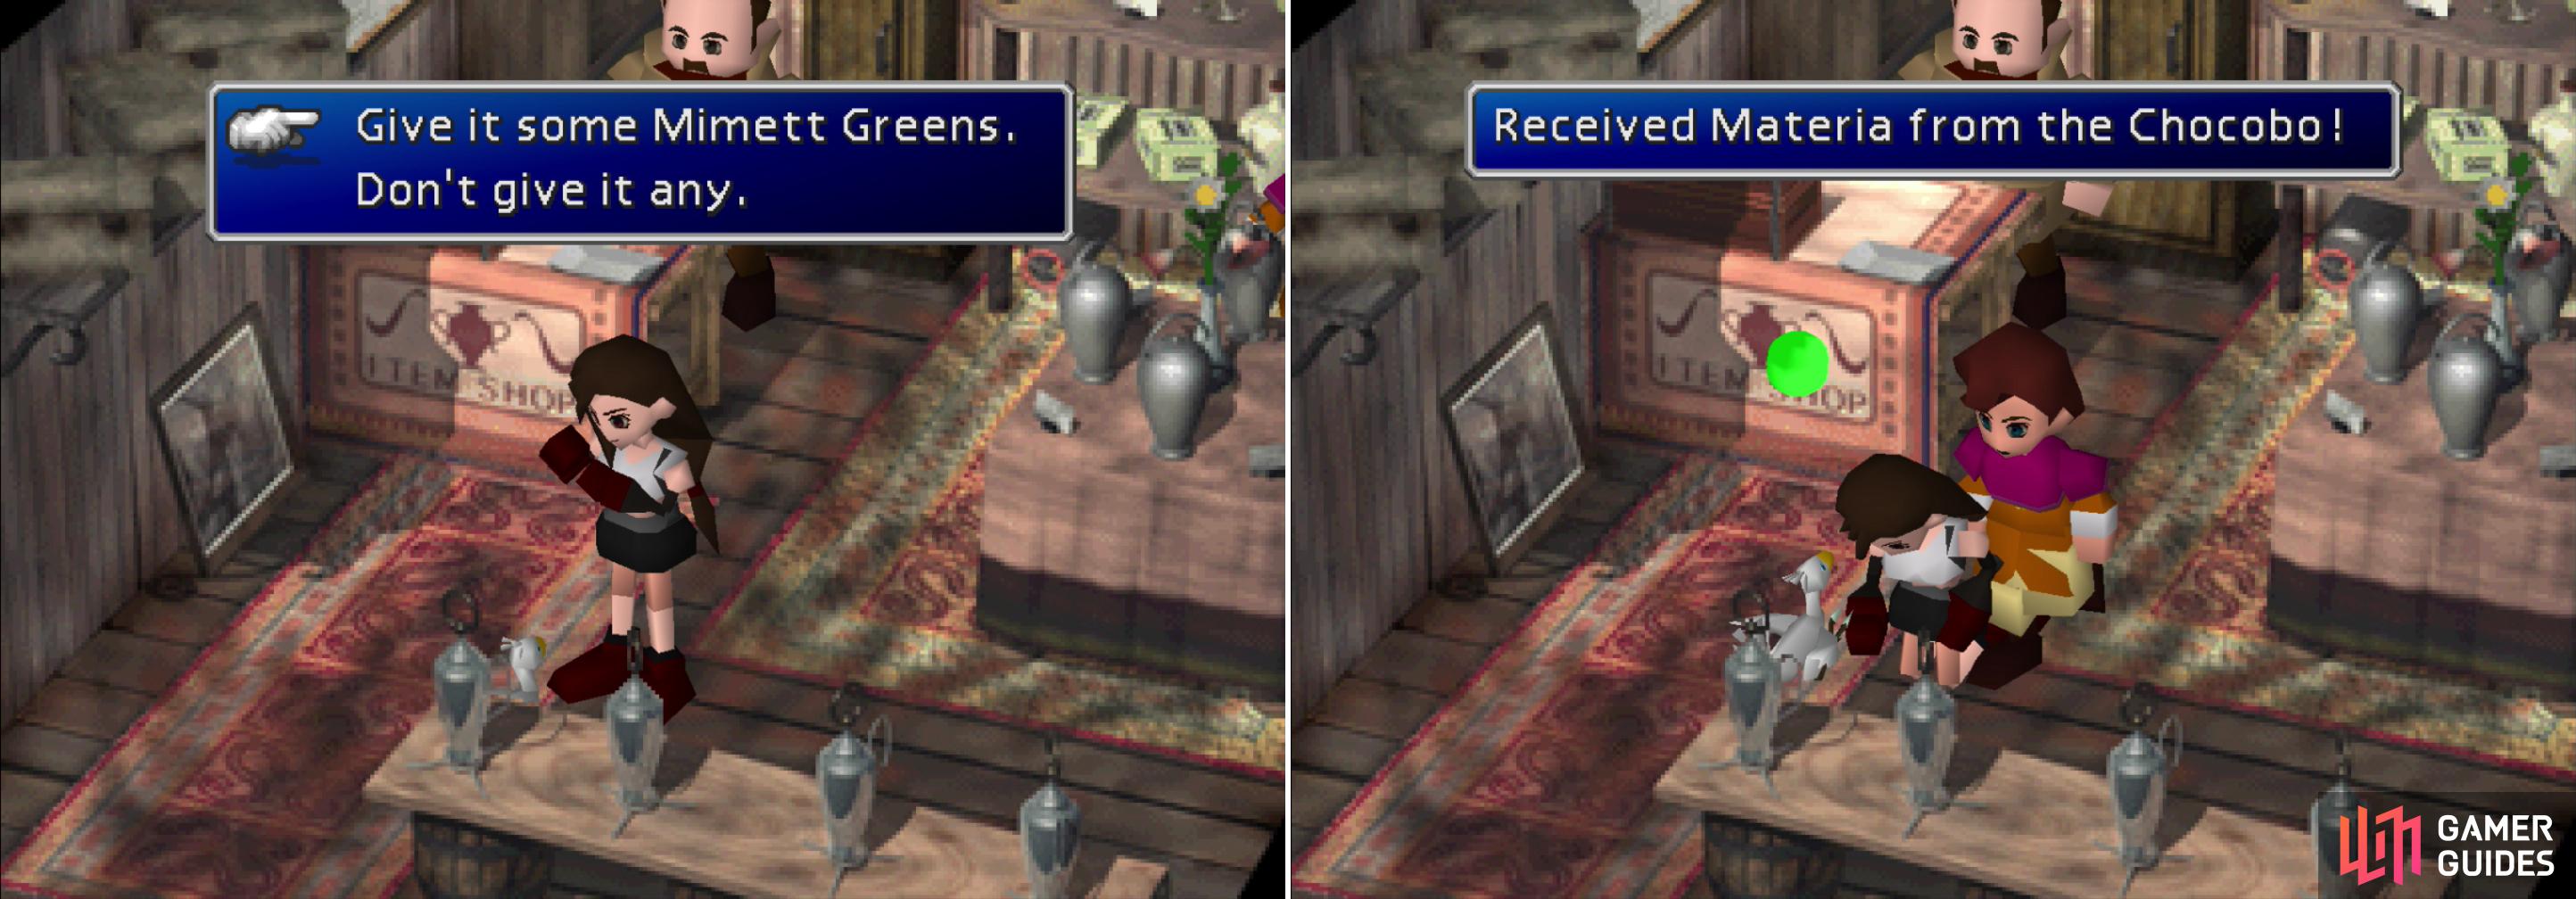 Give the greedy Chocobo some Mimett Greens and scratch behind its ear (left). For pleasing the Chocobo it'll reward you with Contain Materia (right).